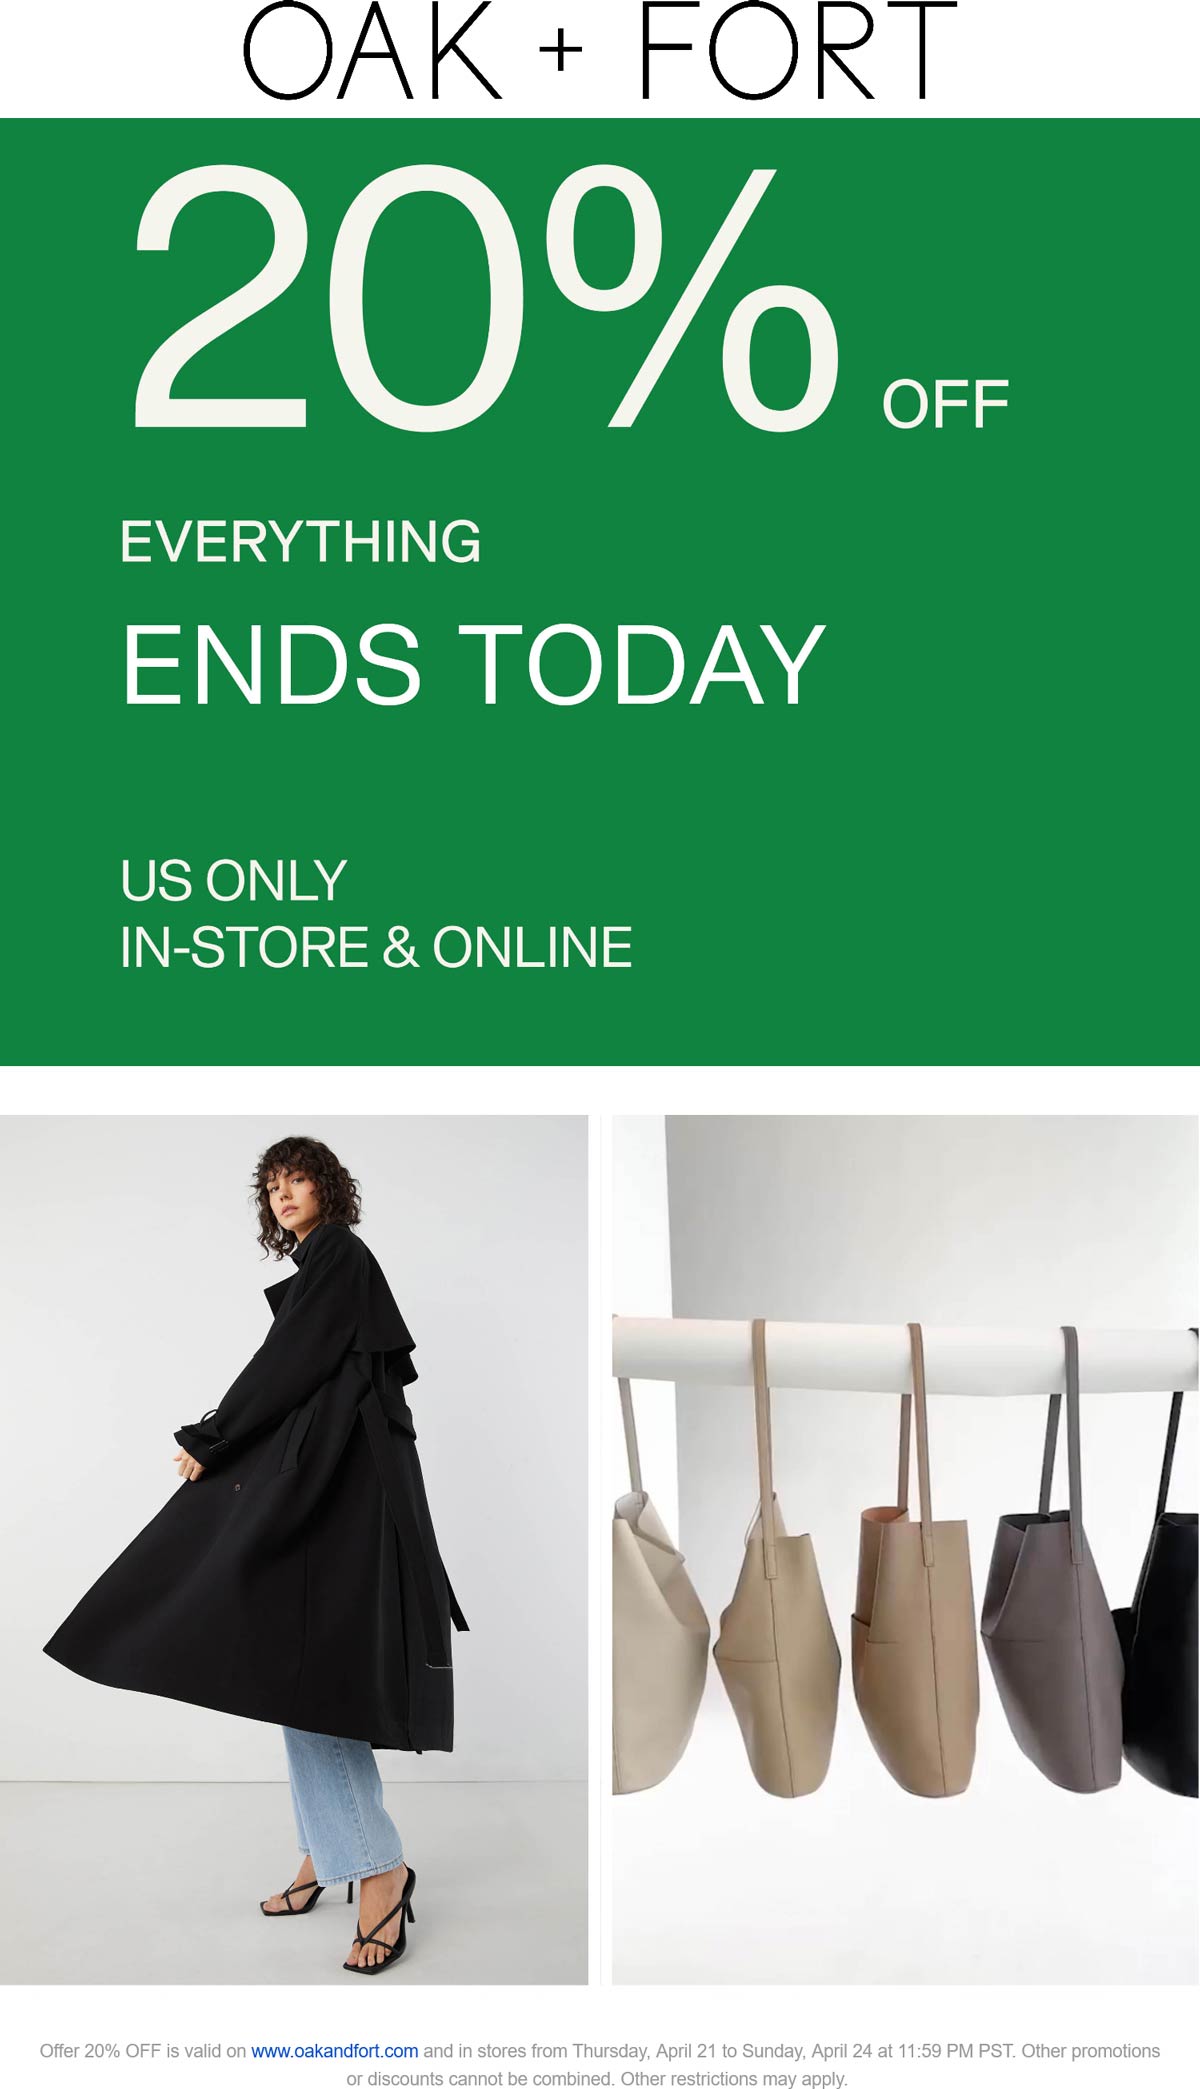 OAK + FORT stores Coupon  20% off everything today at OAK + FORT, ditto online #oakfort 